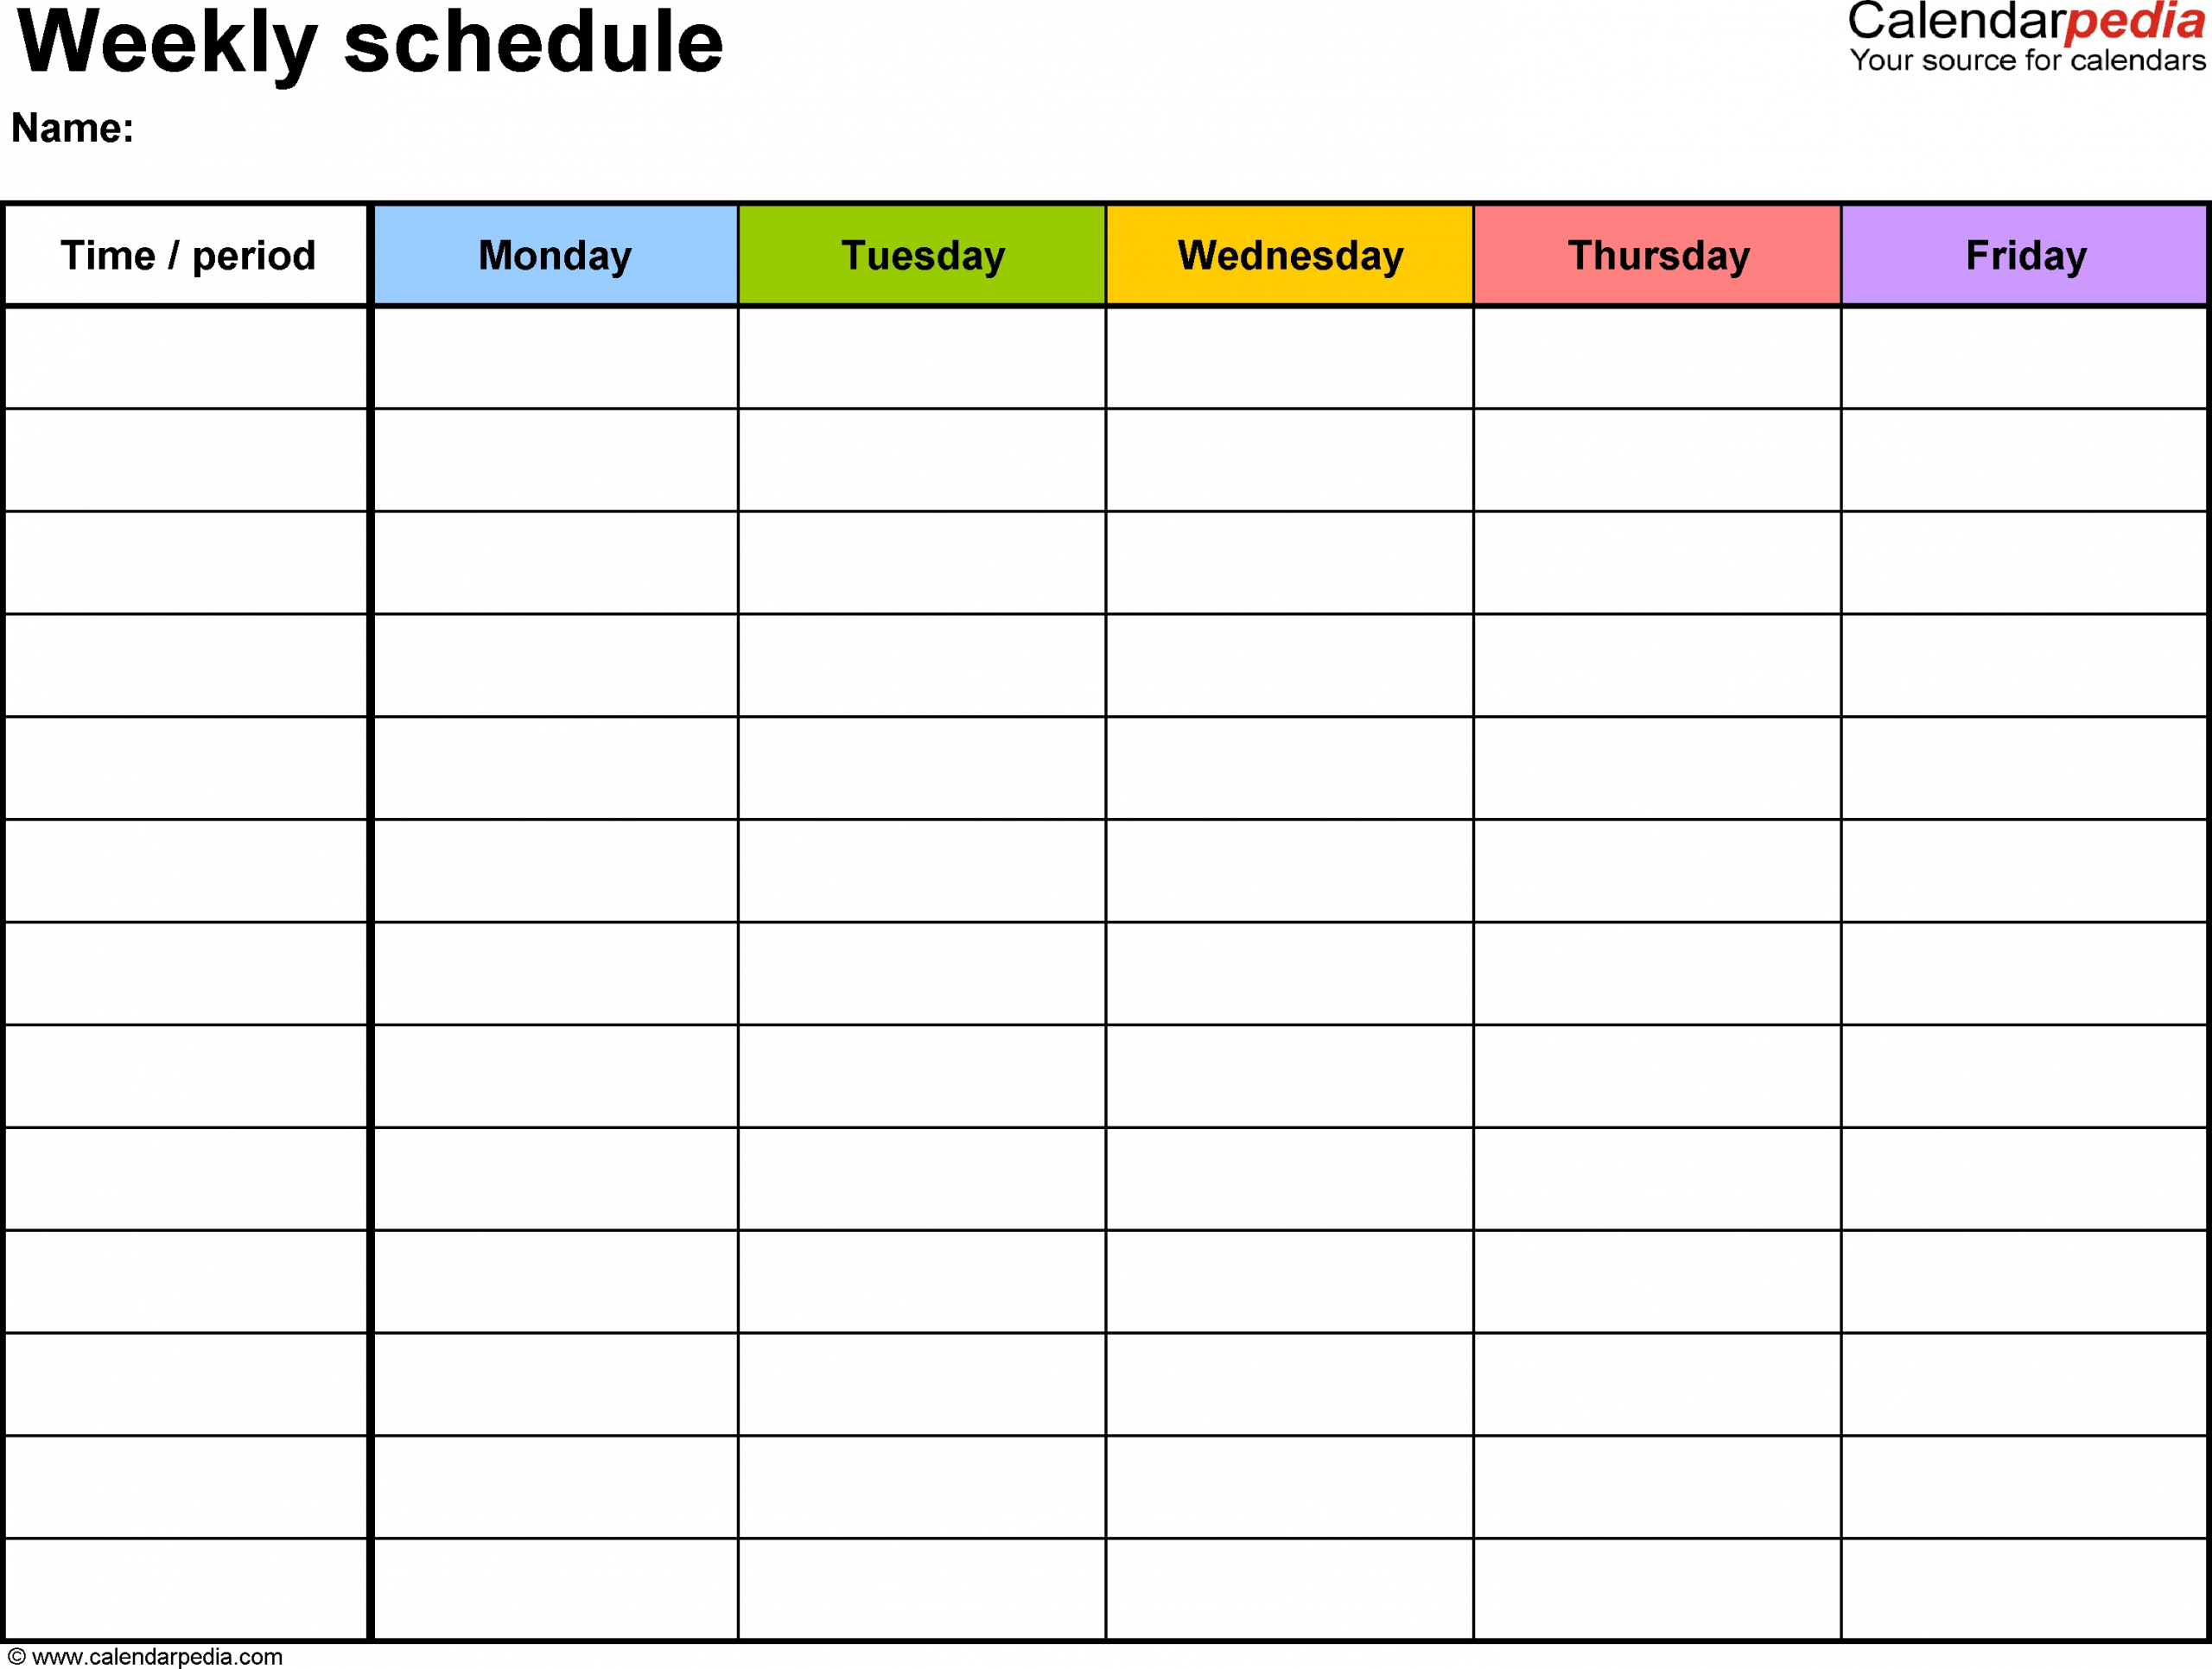 Free Weekly Schedule Templates For Pdf - 18 Templates 5 Day Appointment Calendar Template